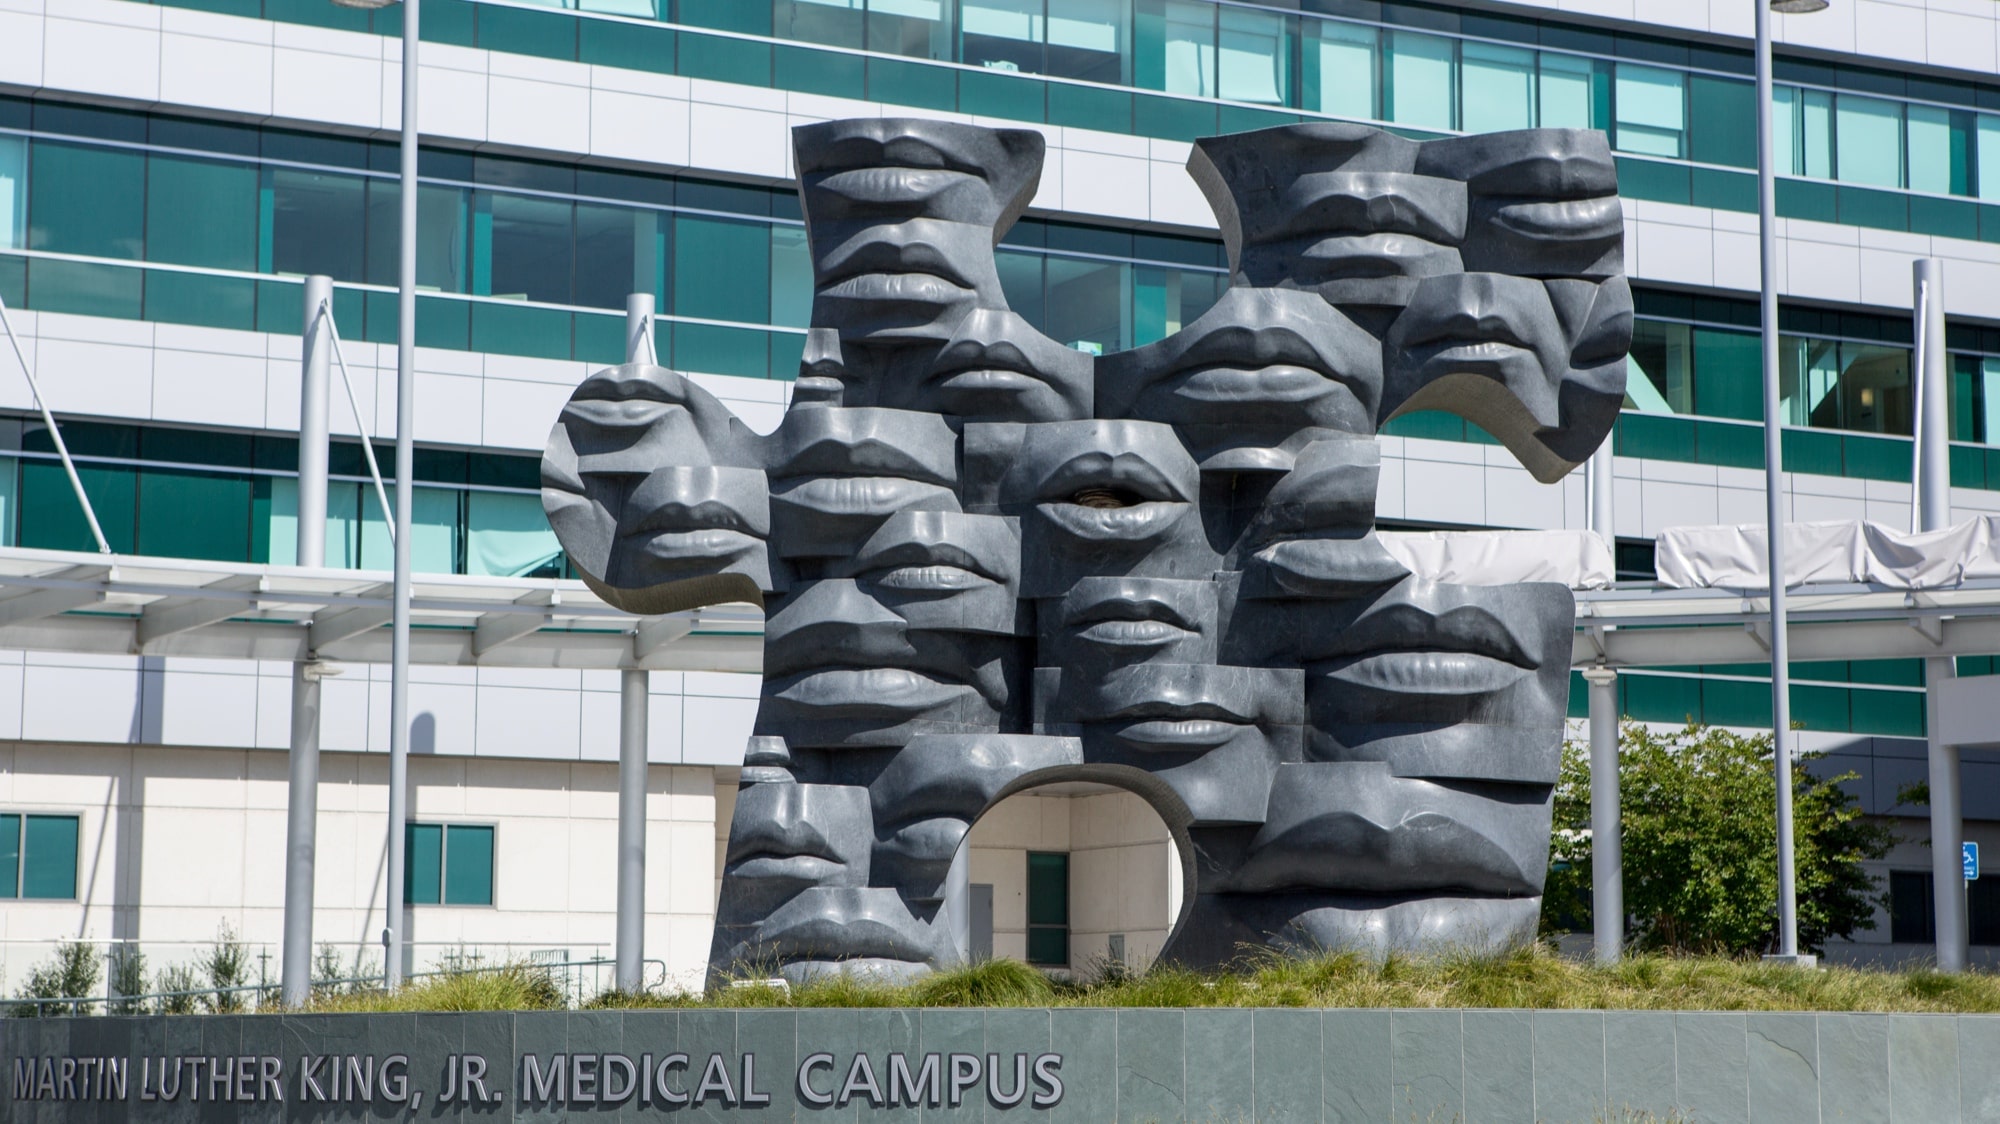 Puzzle piece sculpture in front of MLKCH hospital entrance